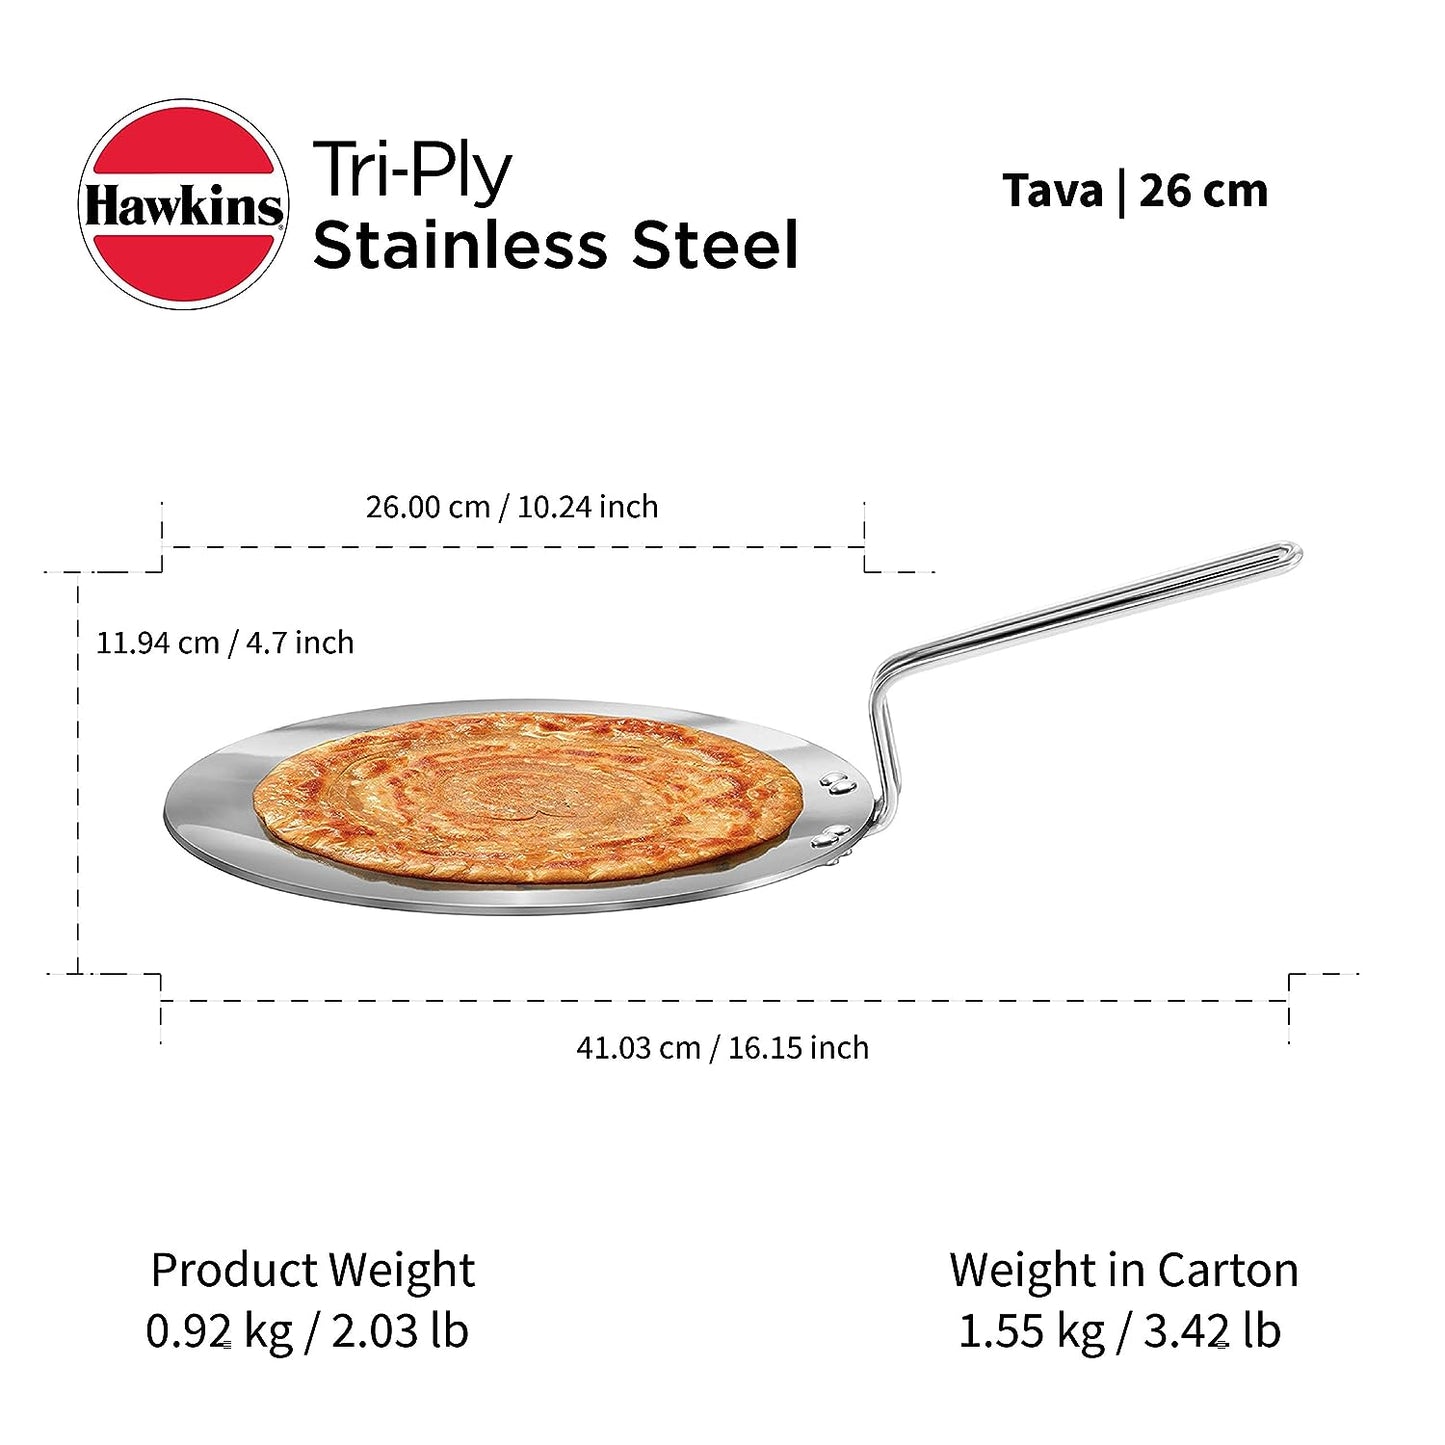 Hawkins Tri-Ply Stainless Steel Tava 26 cm, 3.5mm Induction Compatible - SSTV 26